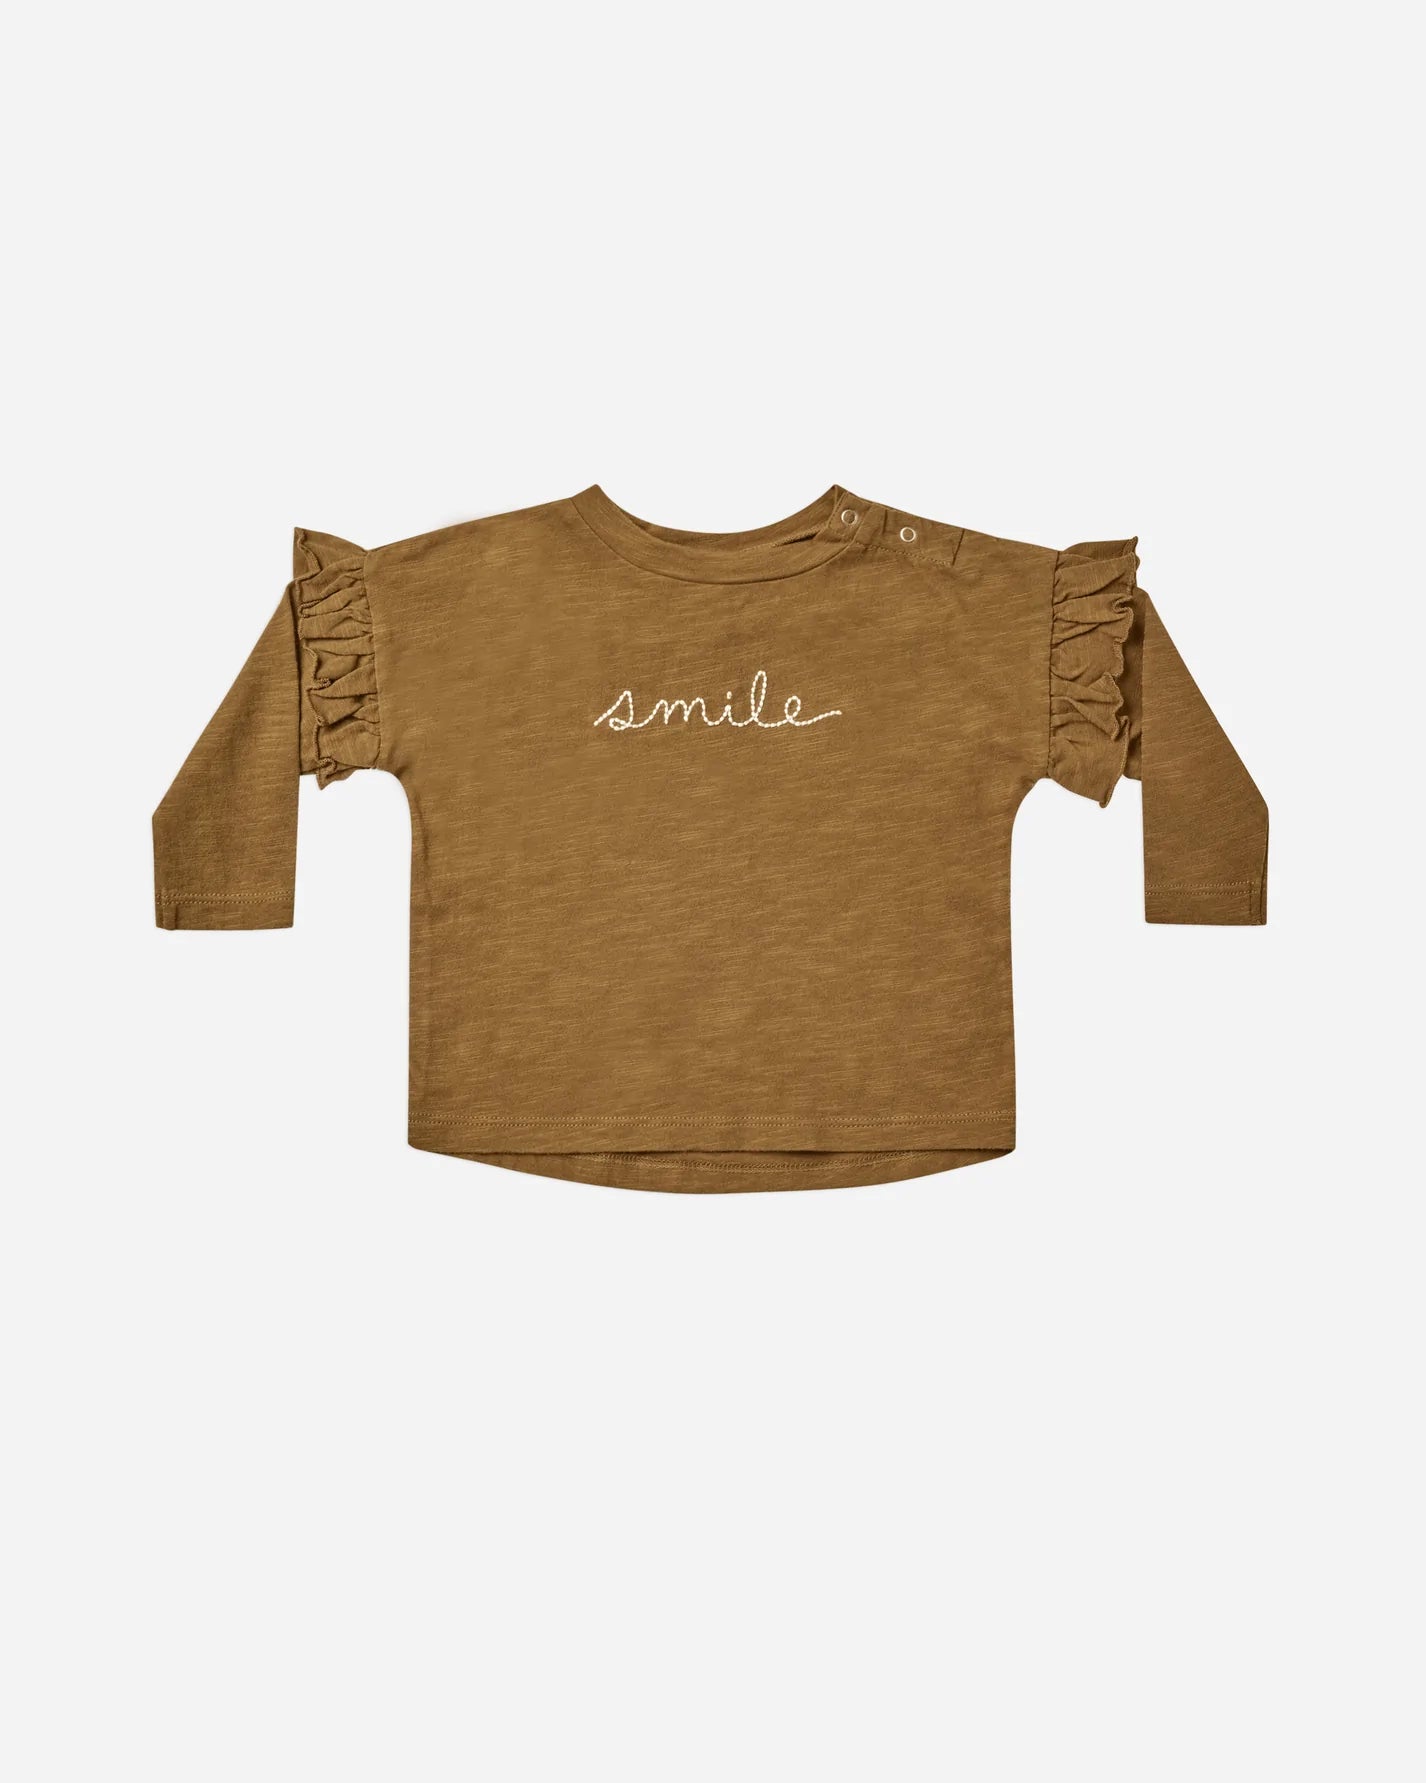 Ruffle Long Sleeve Tee in Smile  - Doodlebug's Children's Boutique